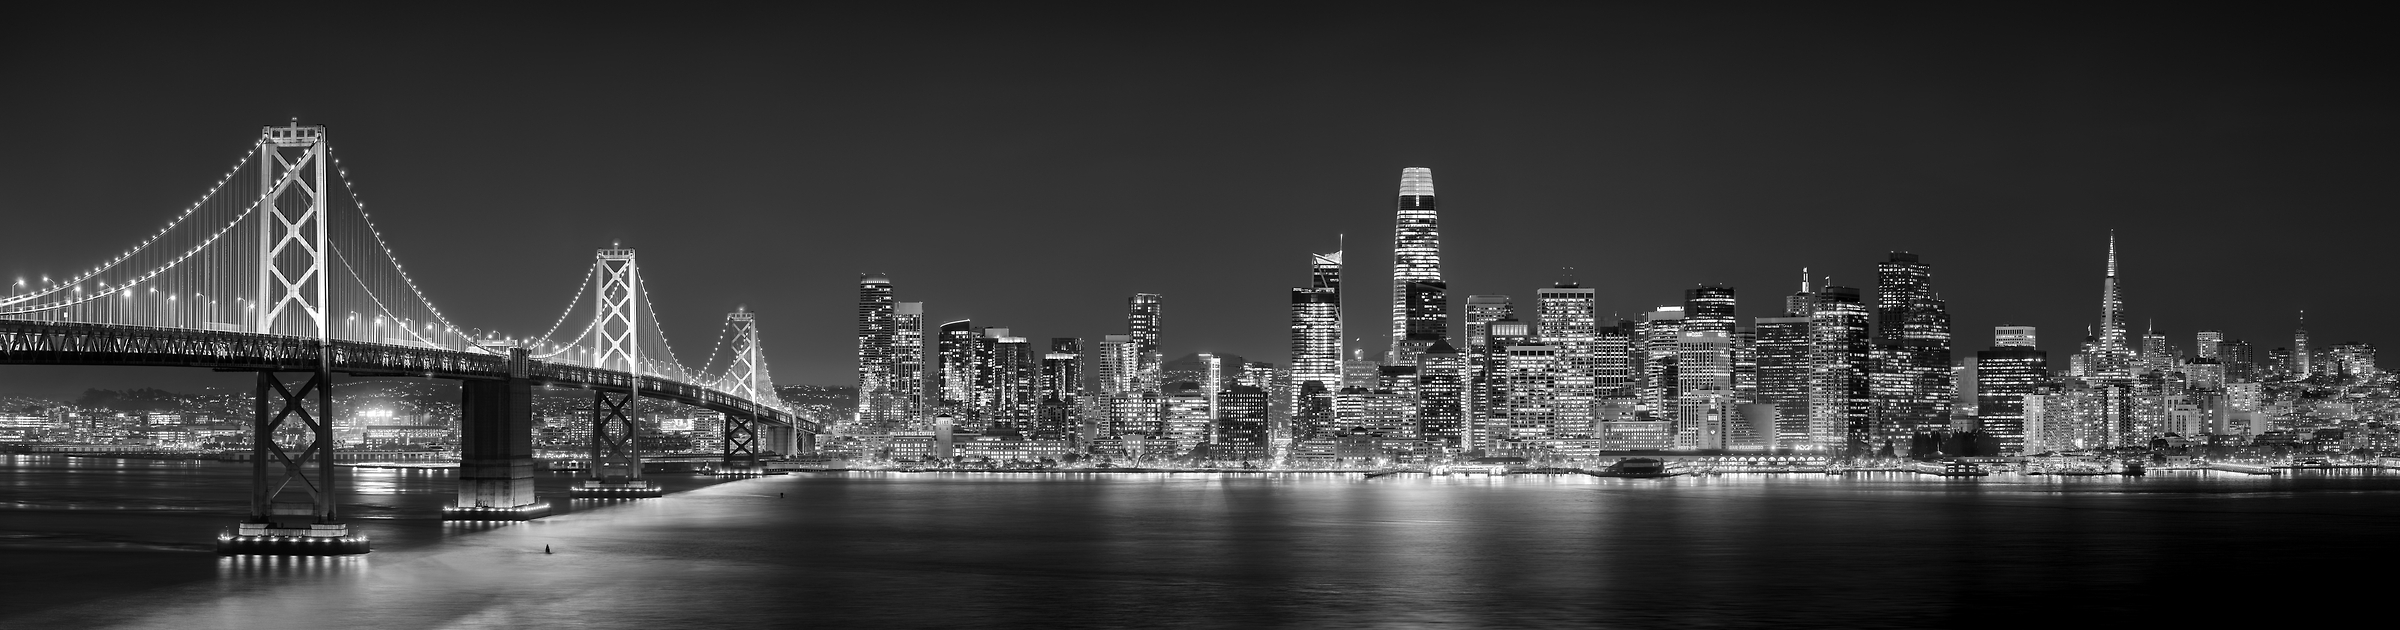 686 megapixels! A very high resolution, large-format VAST photo print of the San Francisco skyline and the Bay Bridge at night; fine art cityscape skyline photograph created by Jim Tarpo in Yerba Buena Island and Treasure Island, San Francisco, California